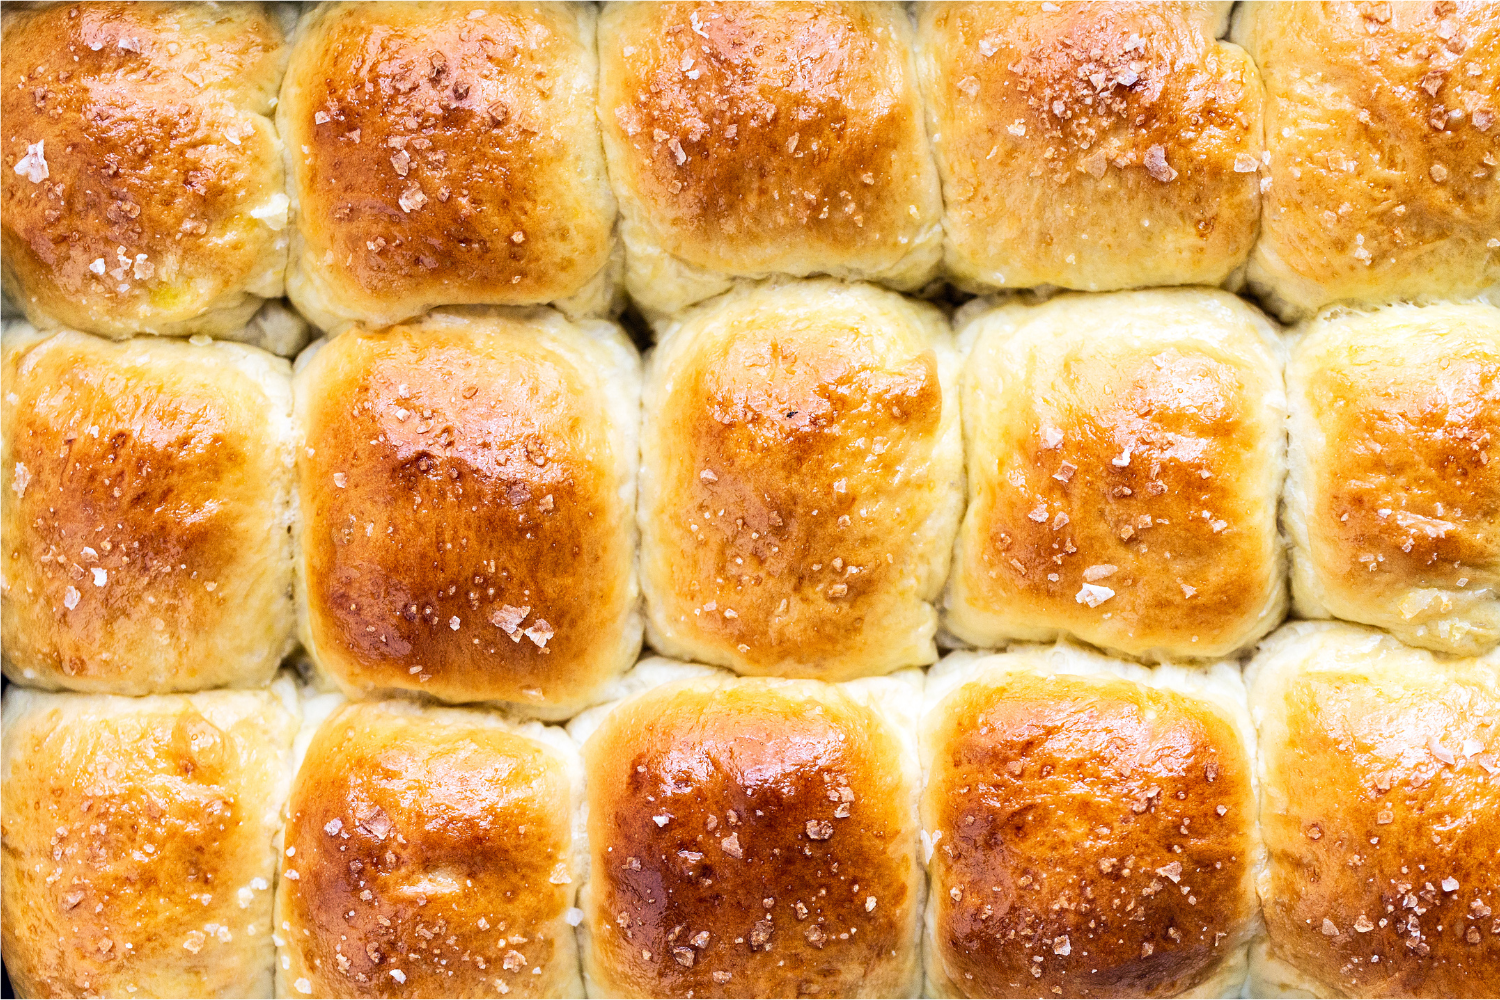 Soft Butter Dinner Rolls fresh out of the oven, golden brown and shiny from their egg wash.